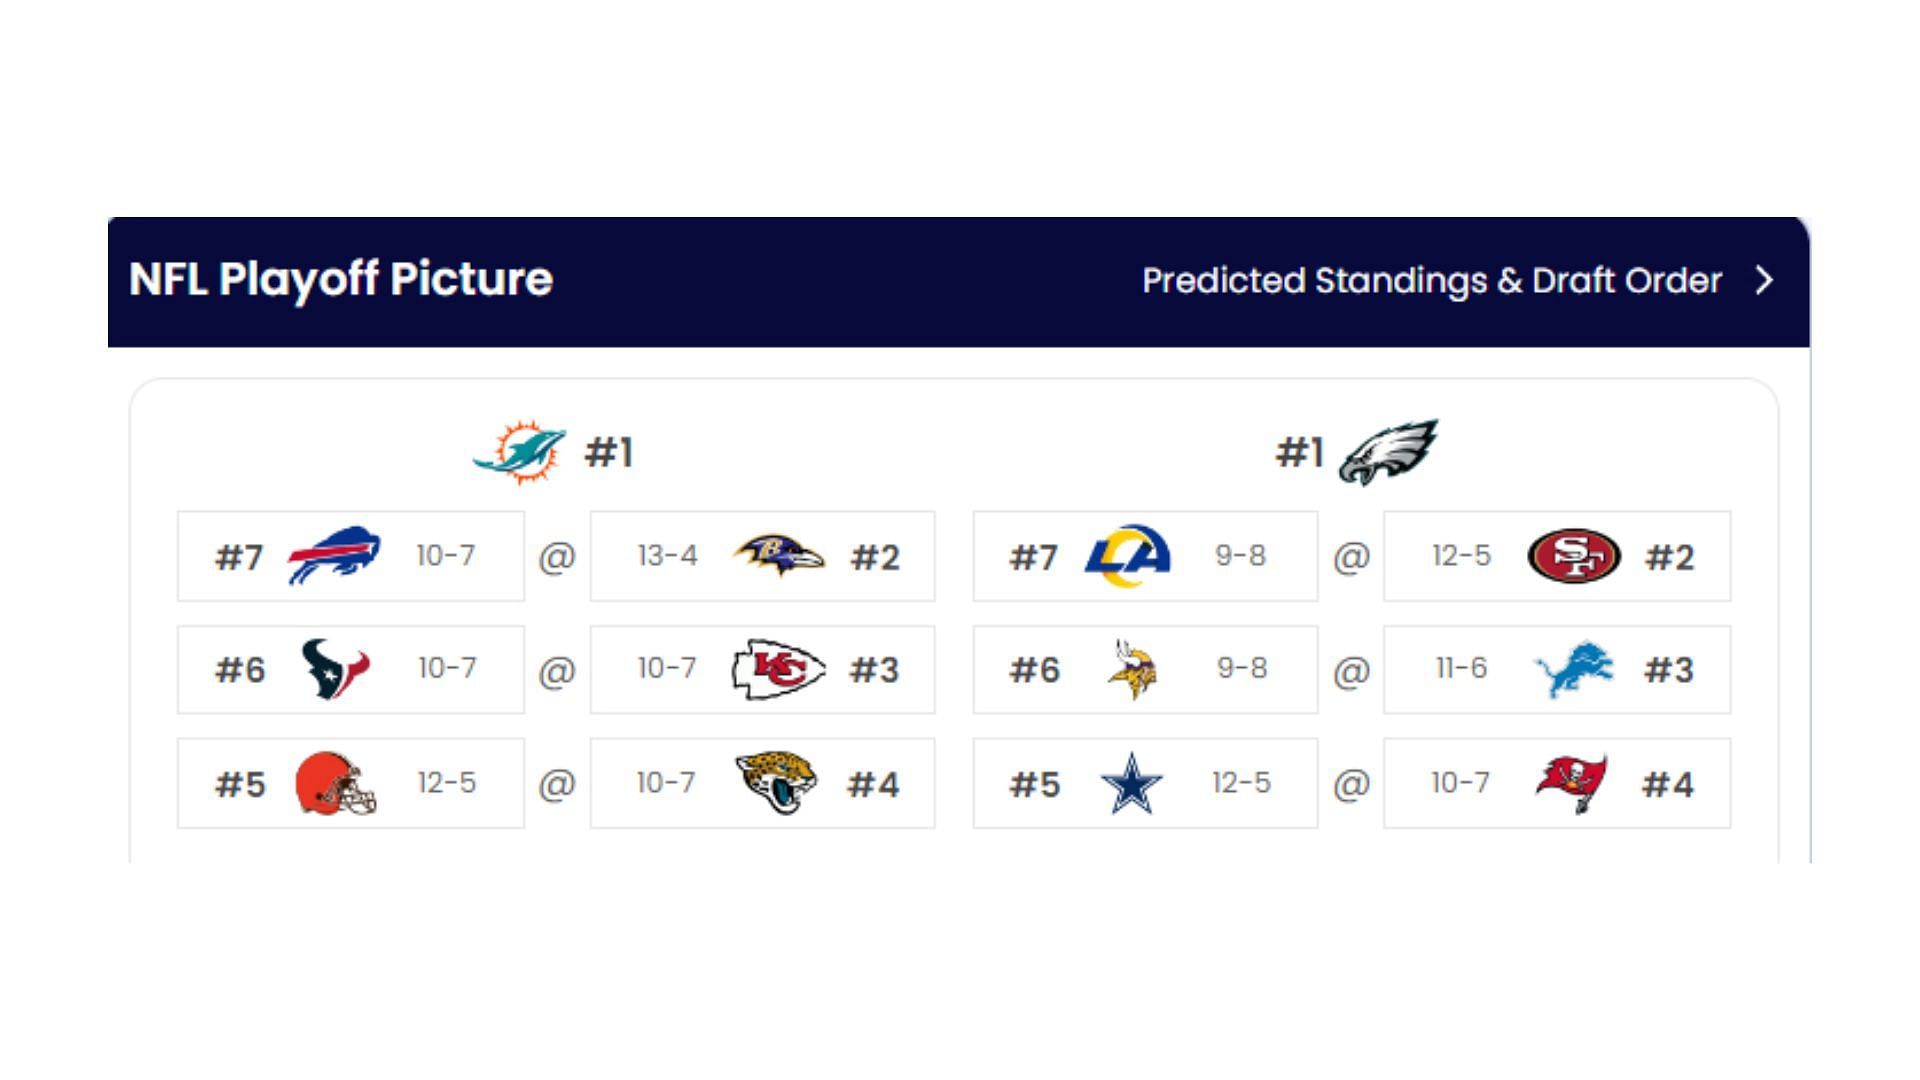 Browns playoff picture after Week 17